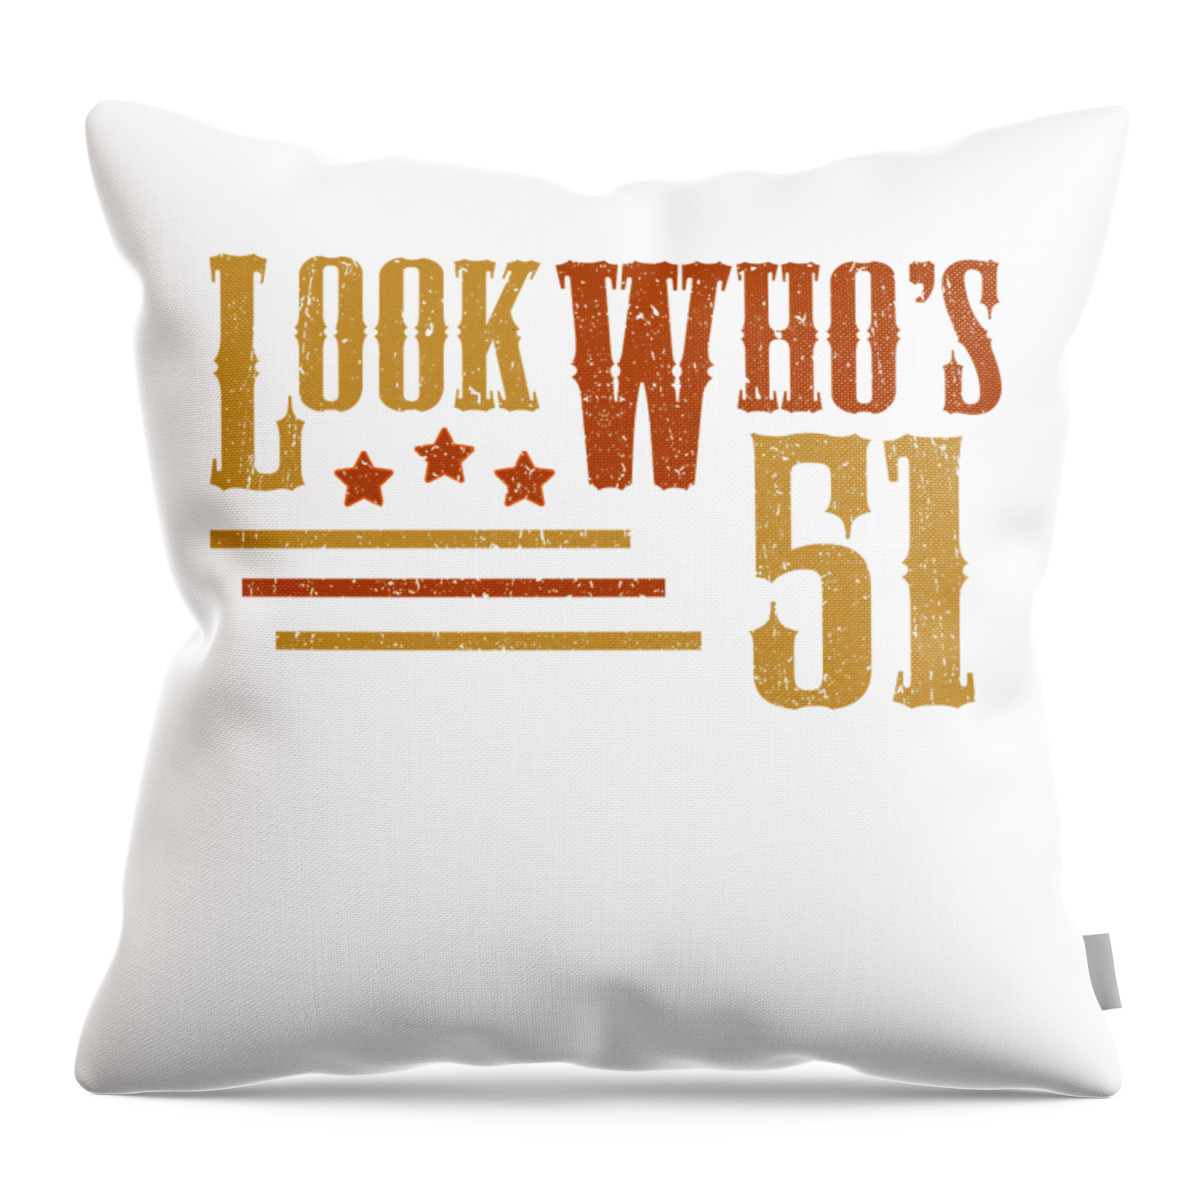 Funny Birthday Gifts & Apparel 51 Year Old Meme-Funny 51st Birthday Throw Pillow 16x16 Multicolor